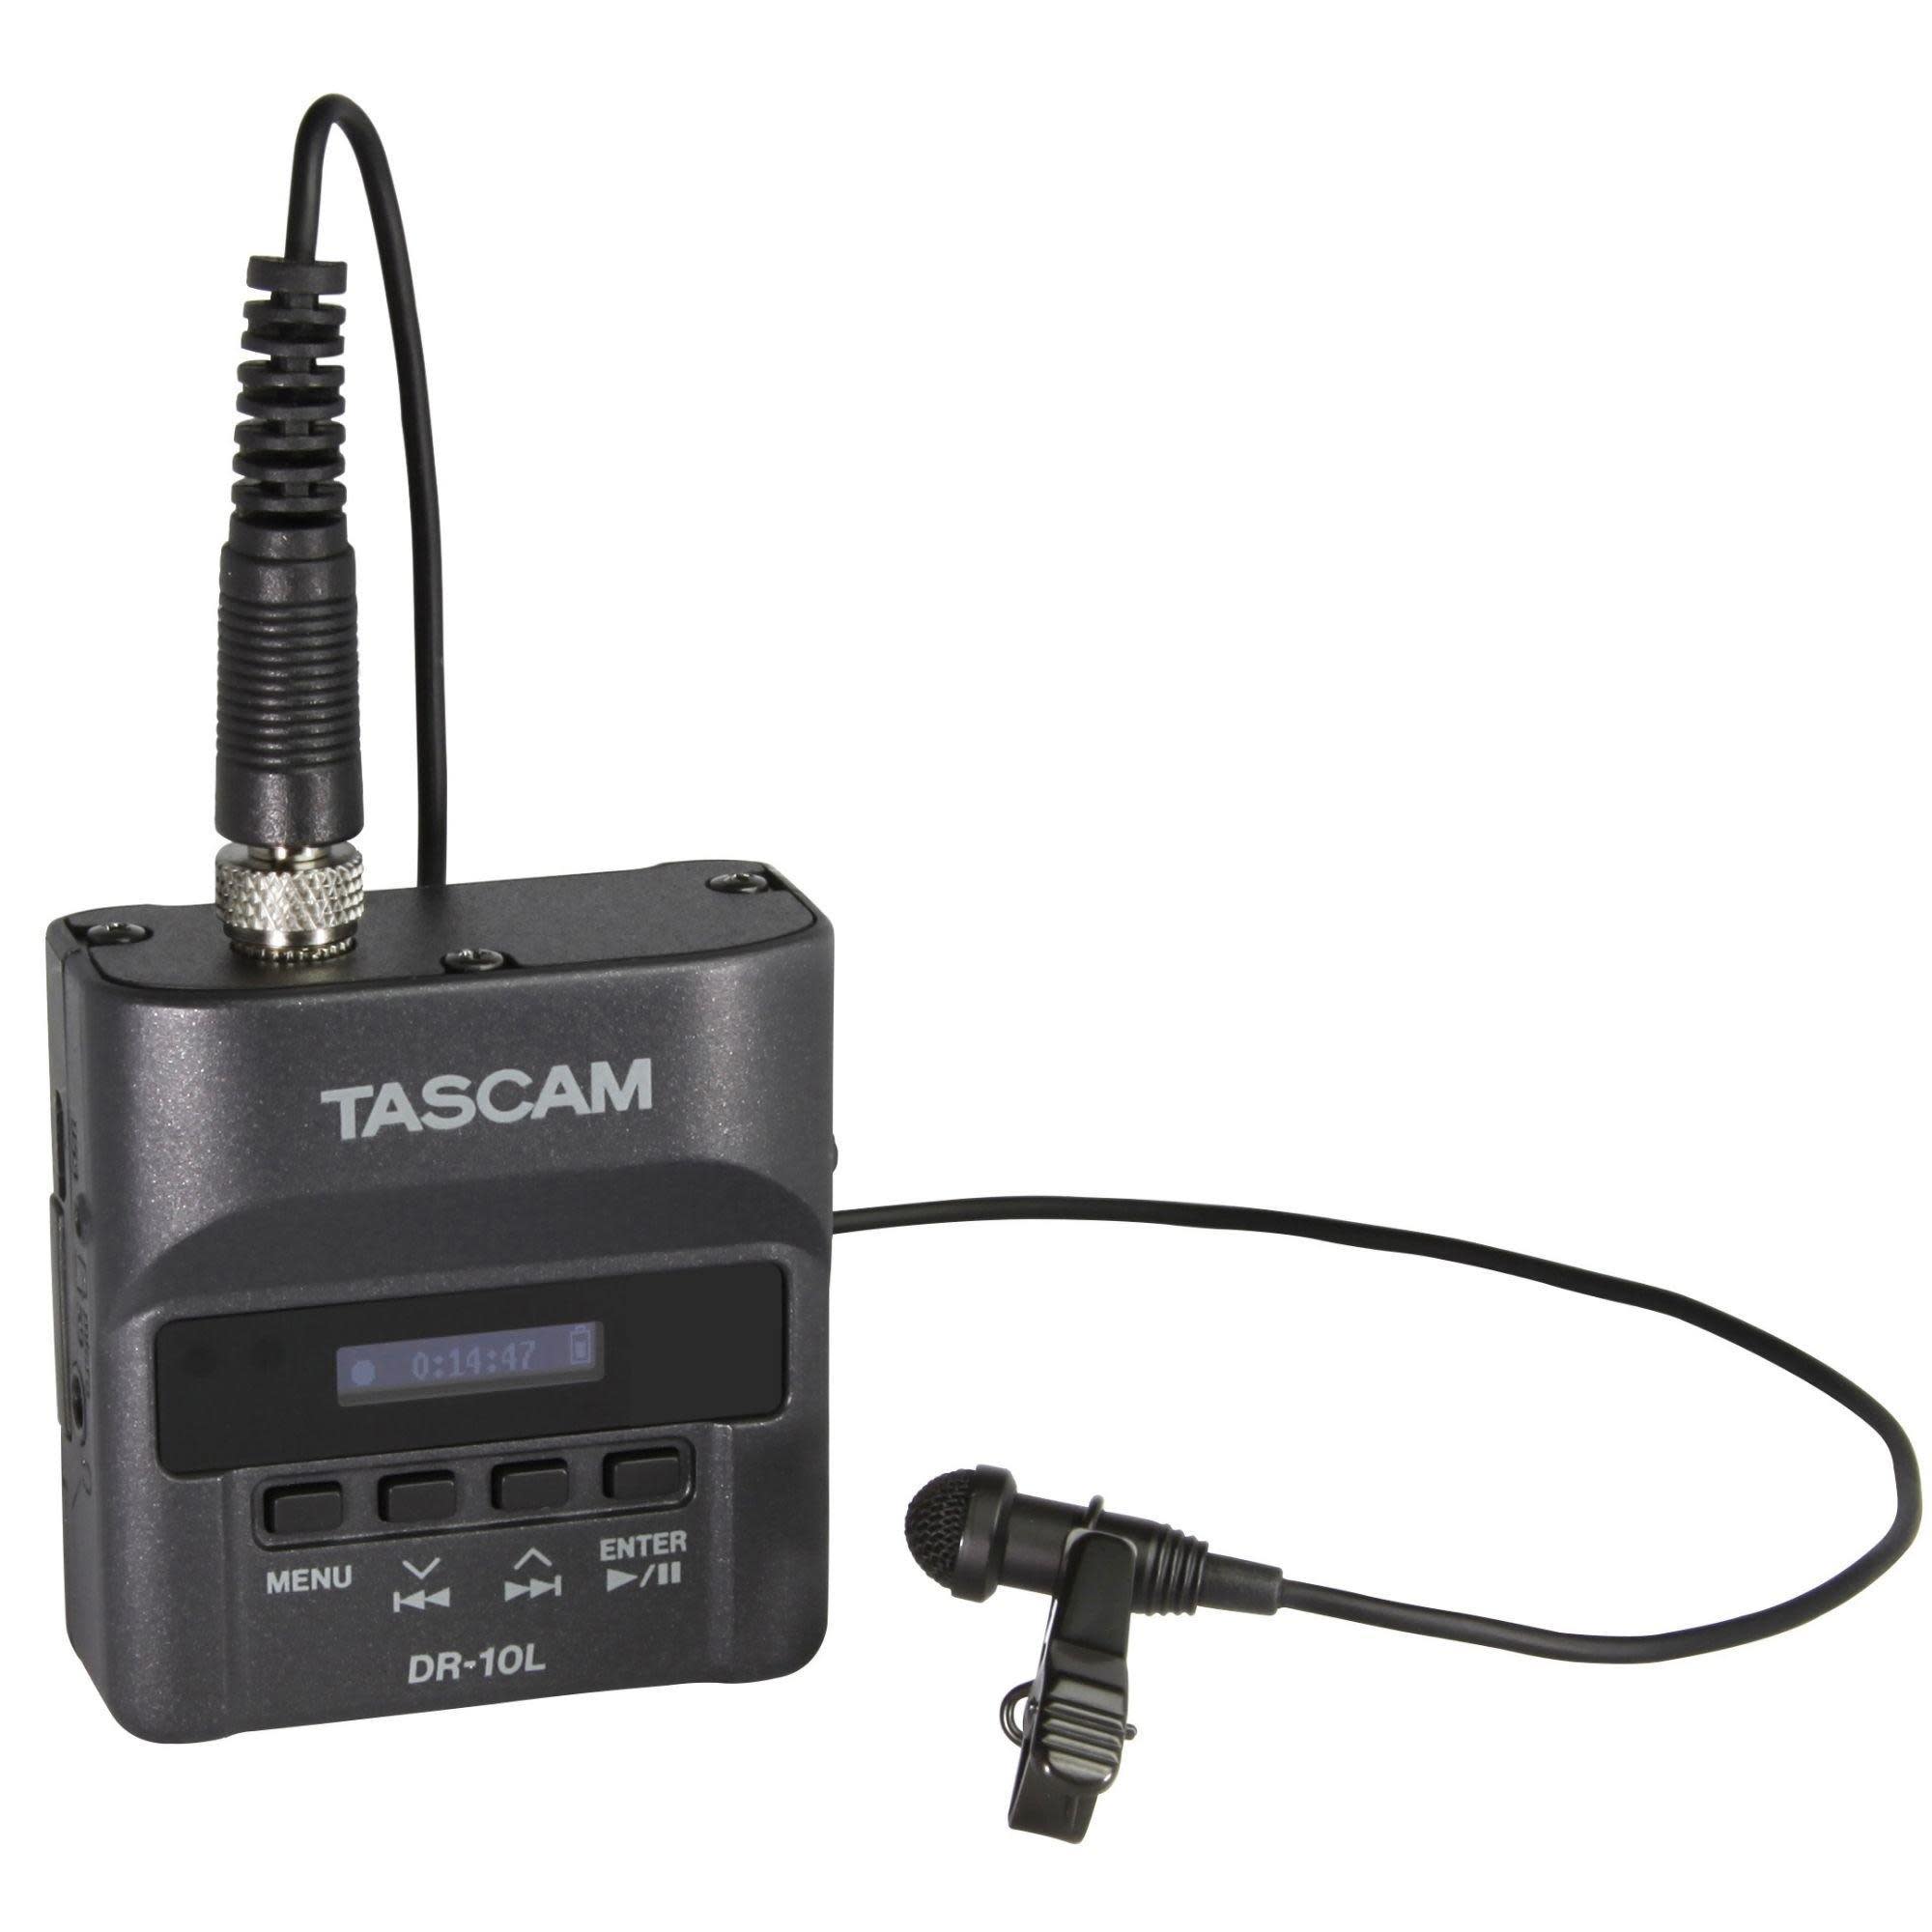 Tascam, Tascam DR-10L Portable Digital Audio Recorder with Lavalier Microphone